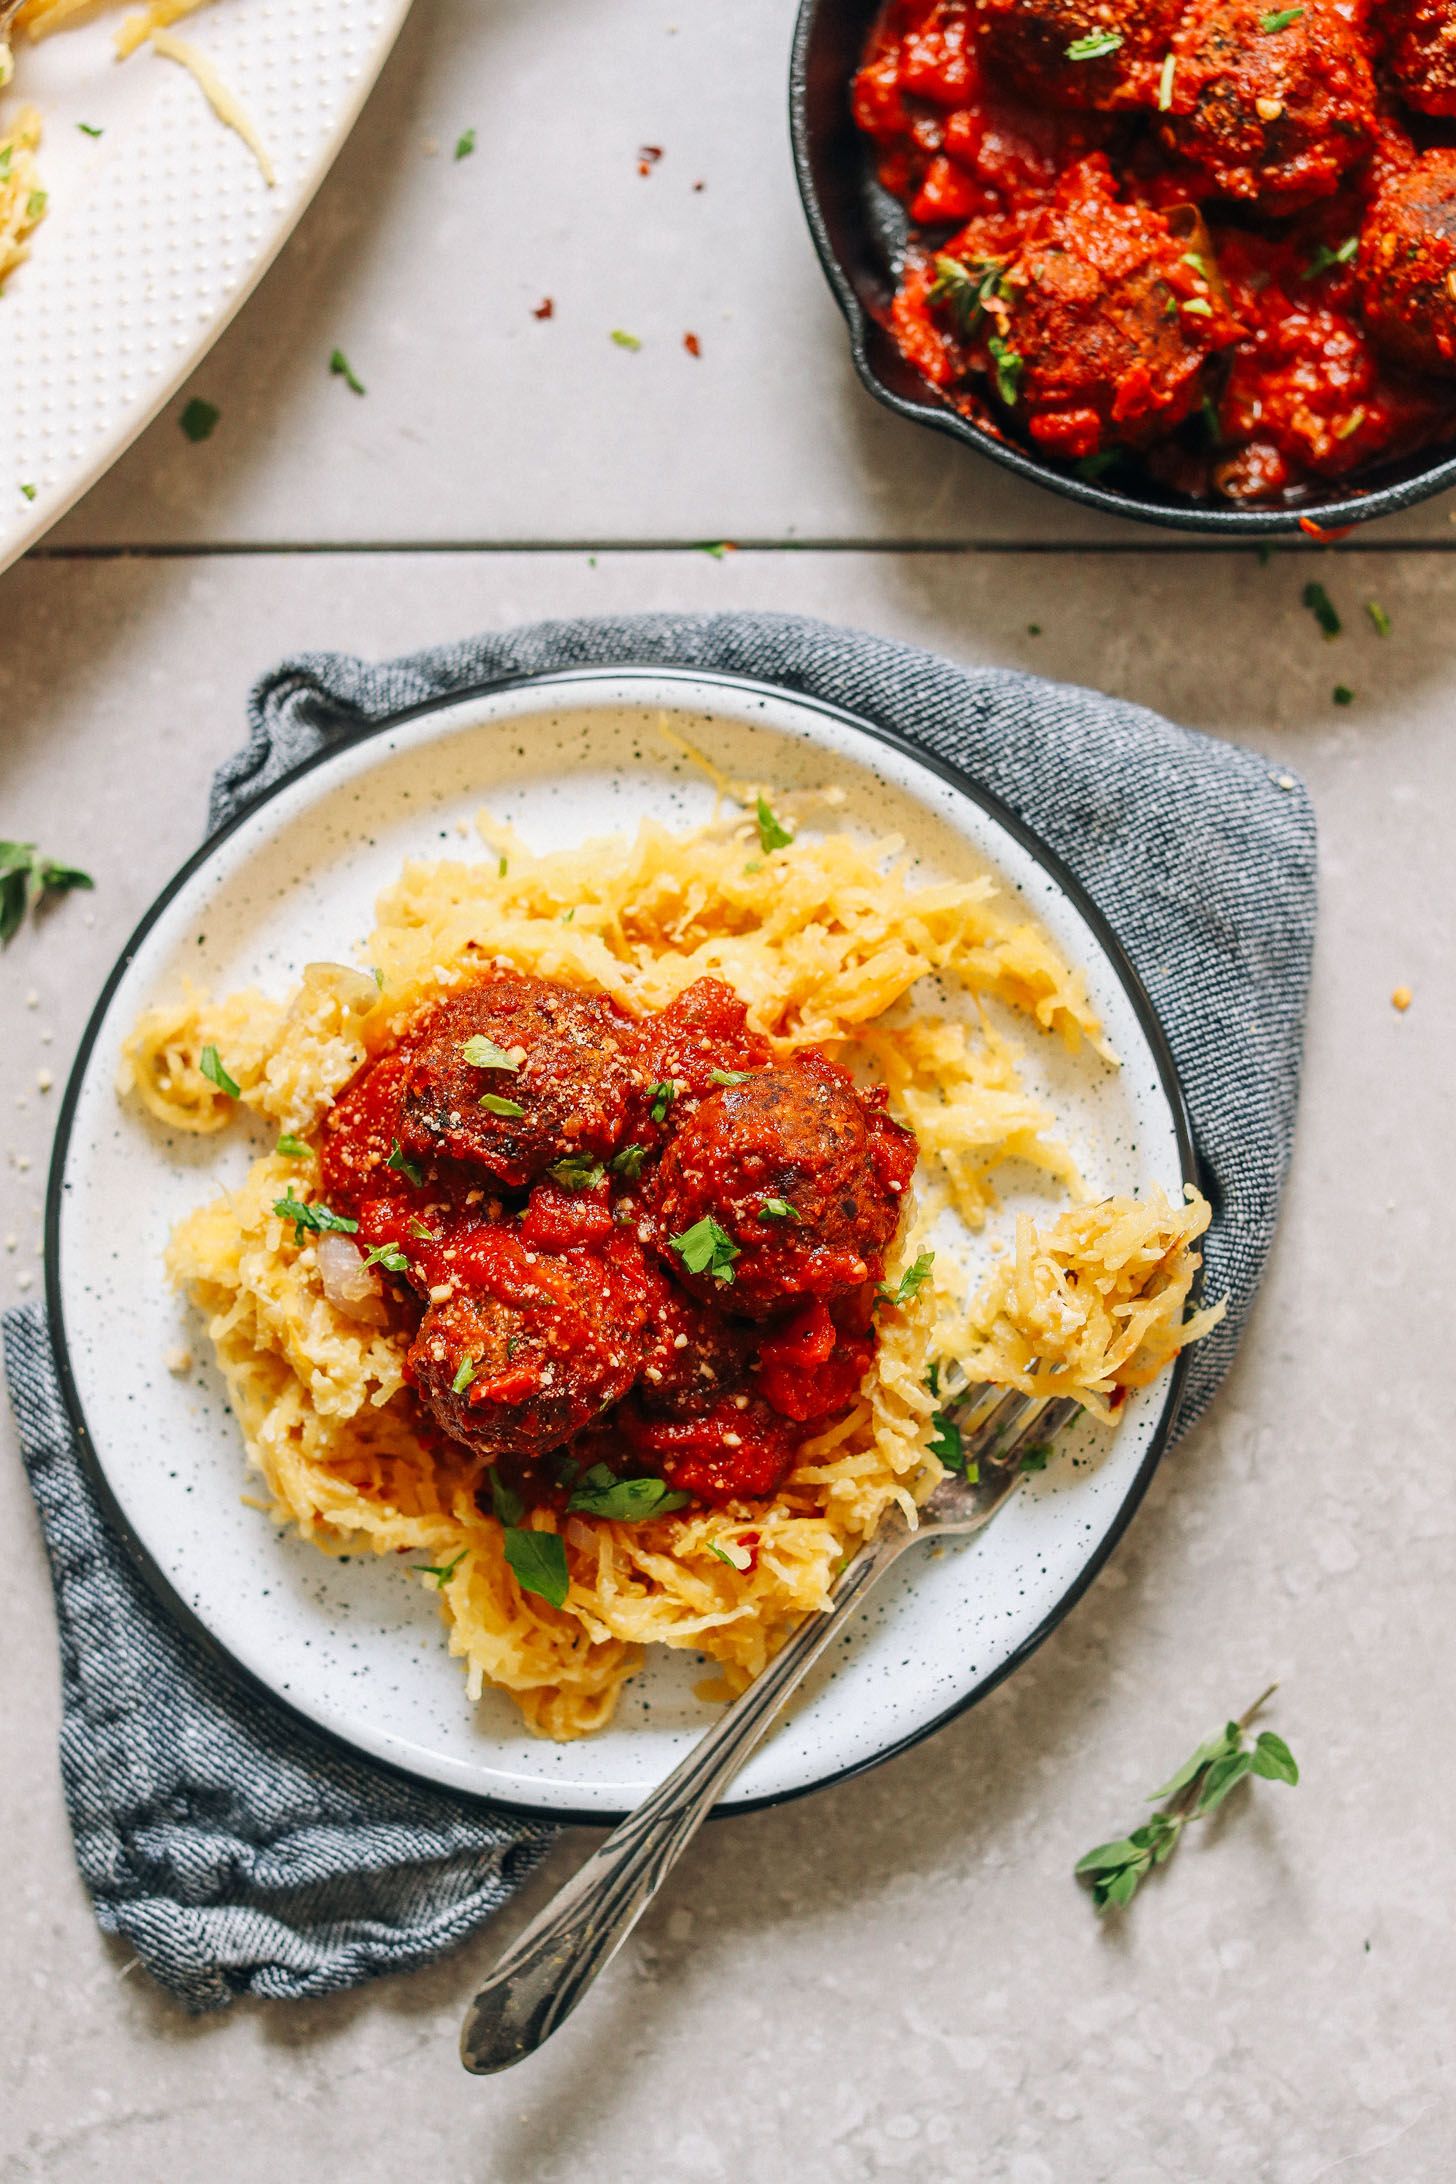 Dinner plate with Cheesy Spaghetti Squash Pasta for a gluten-free vegan meal